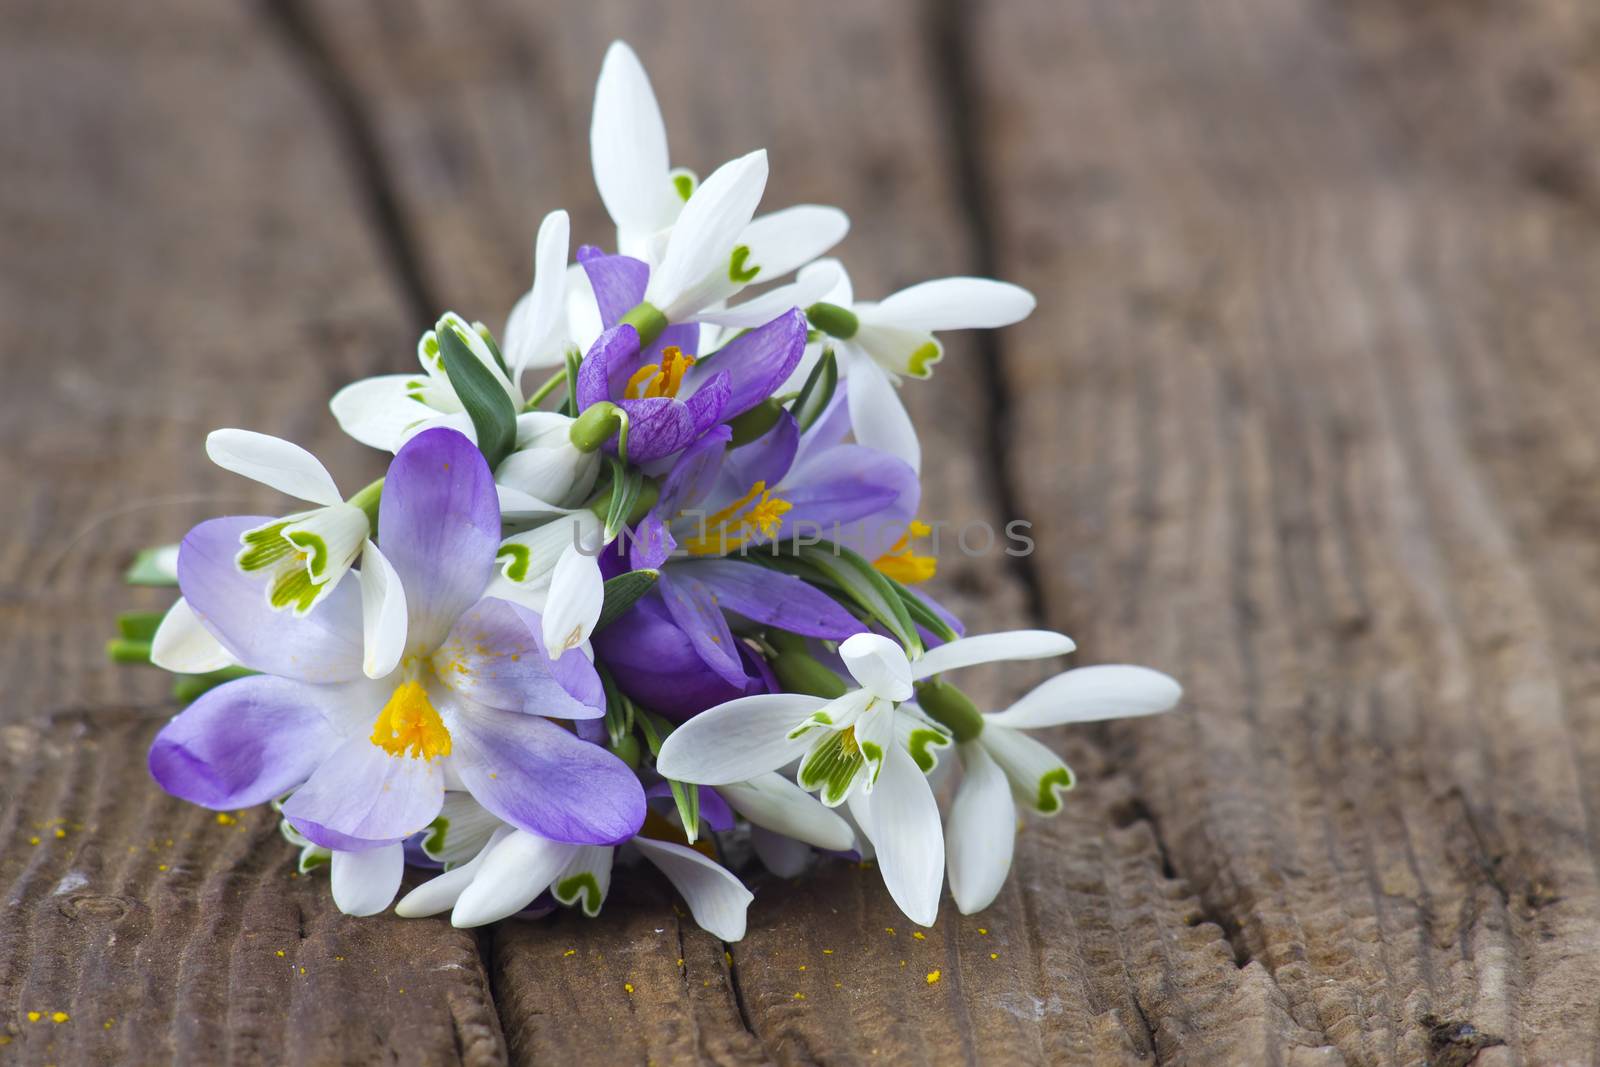 Bunch of crocus and snowdrops on the wooden table. by miradrozdowski